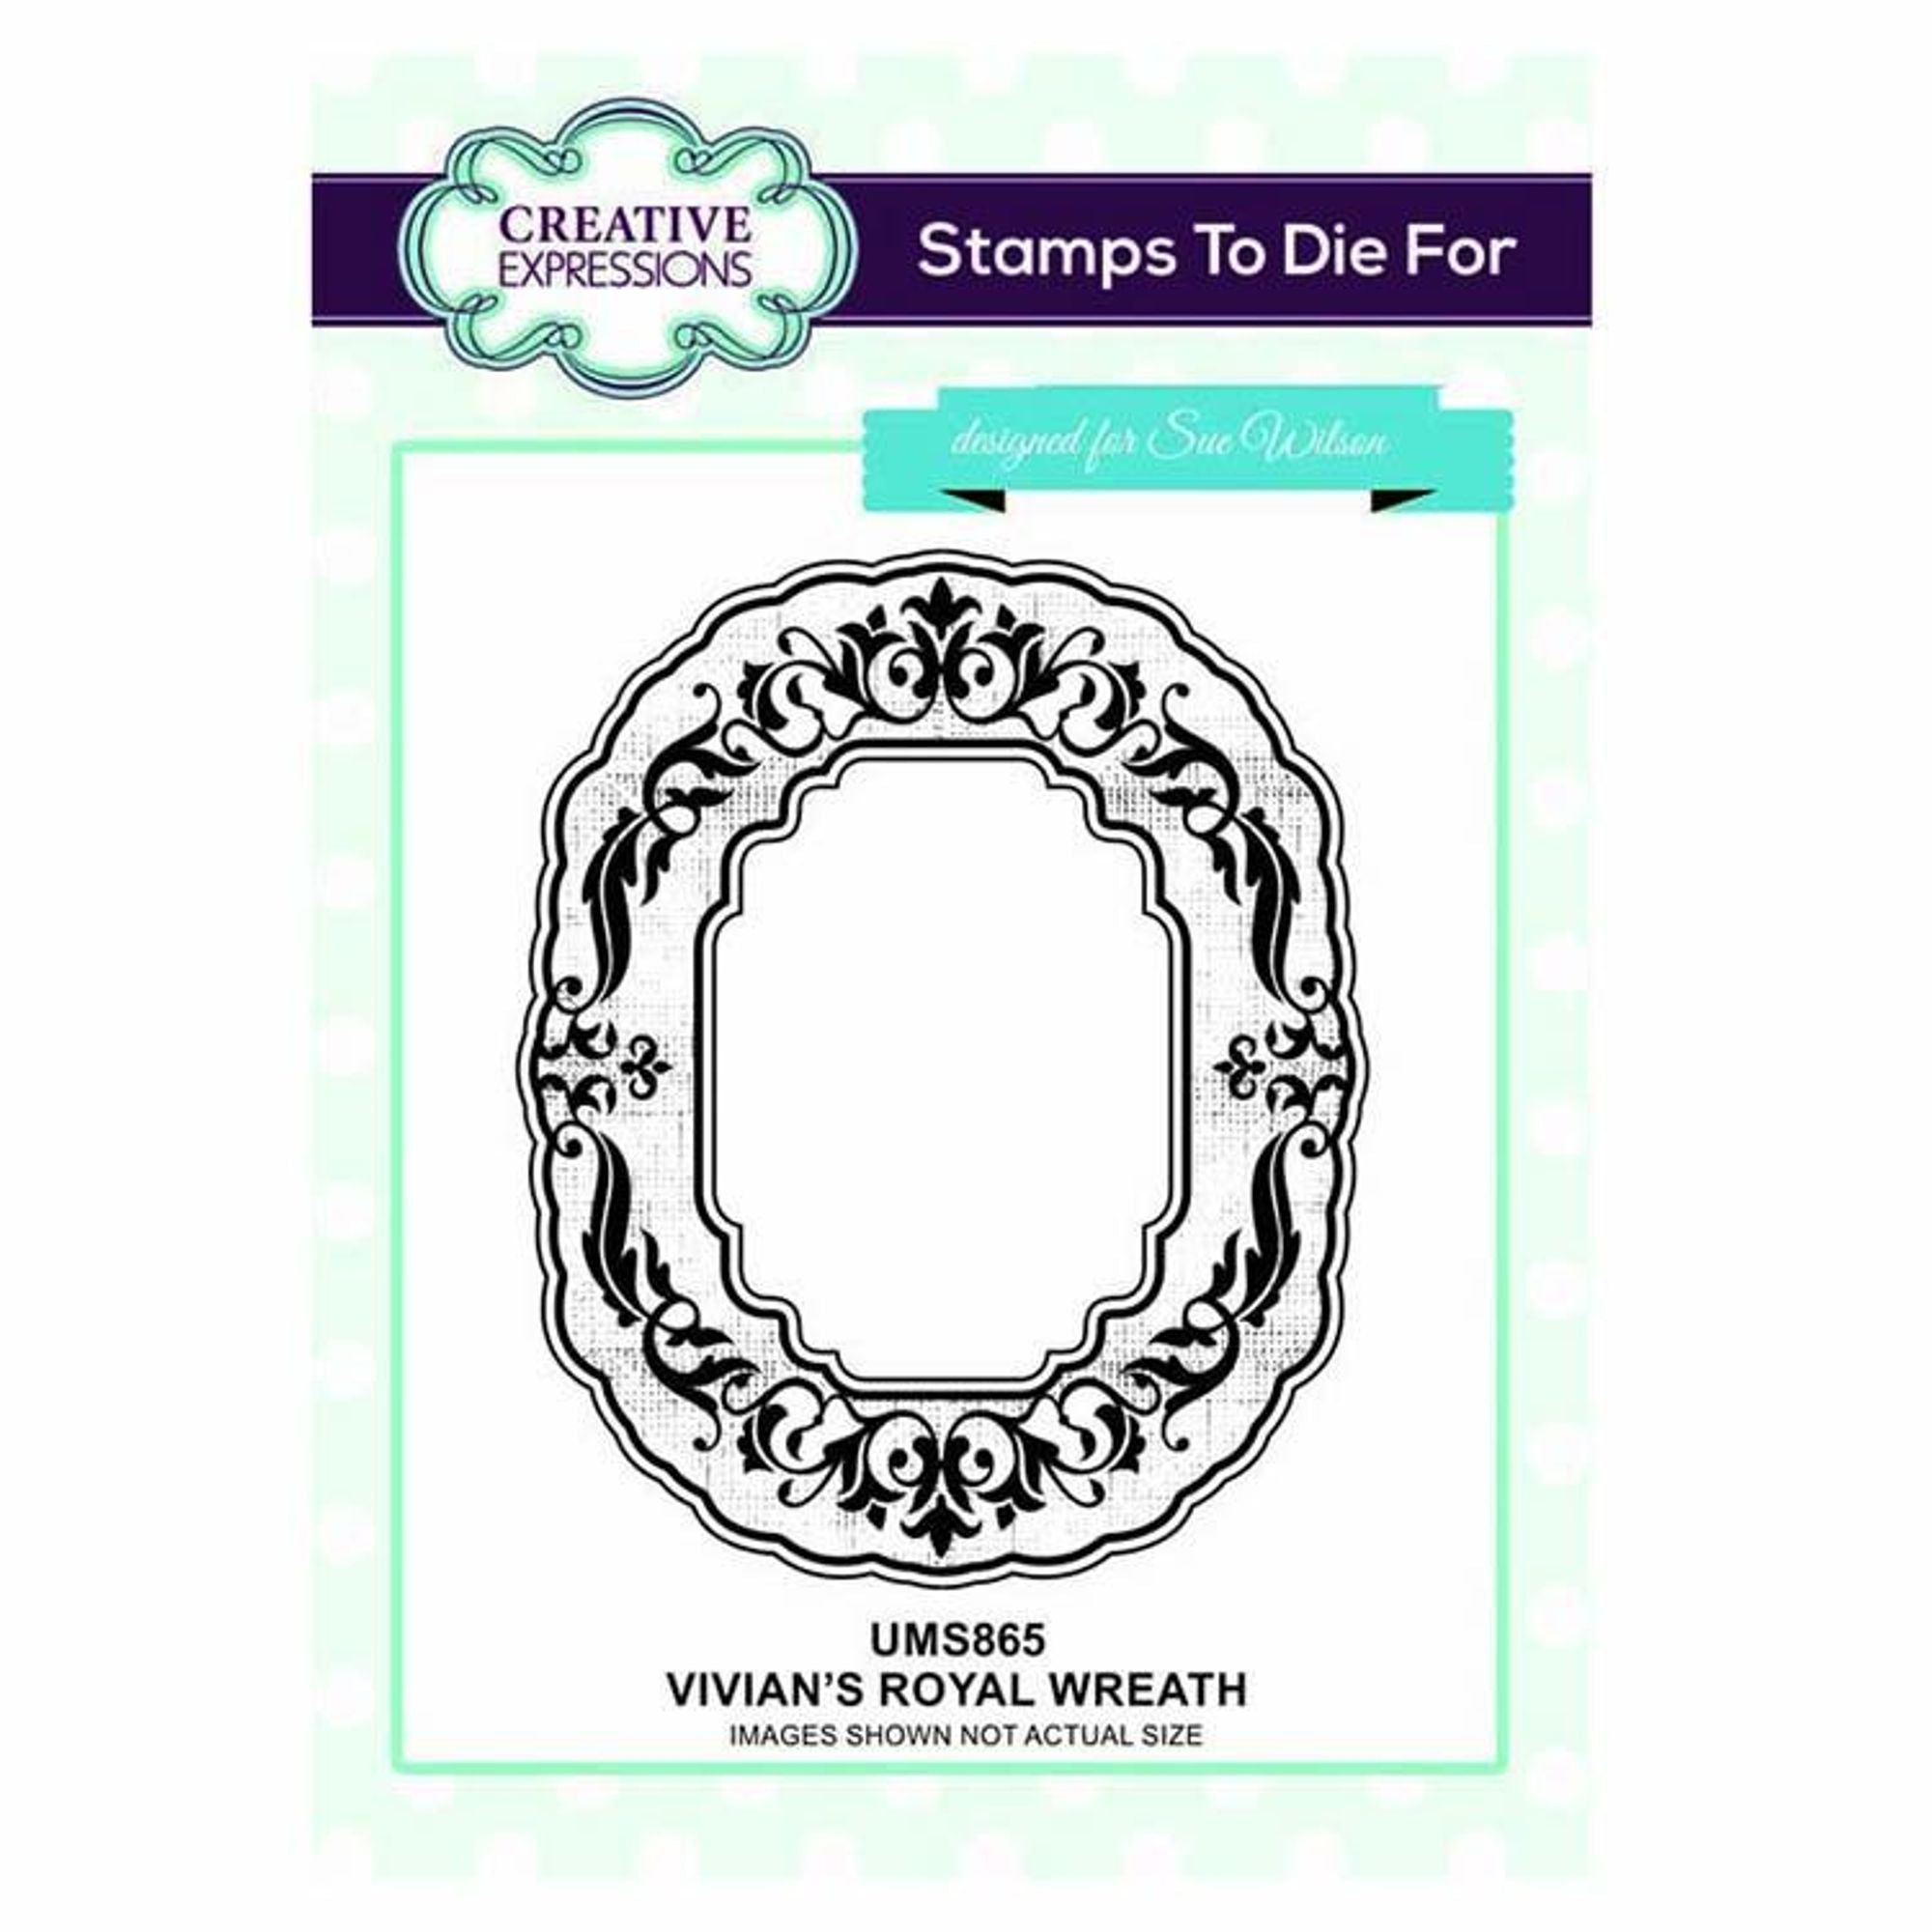 Creative Expressions Stamps To Die For Vivian's Royal Wreath Pre Cut Stamp